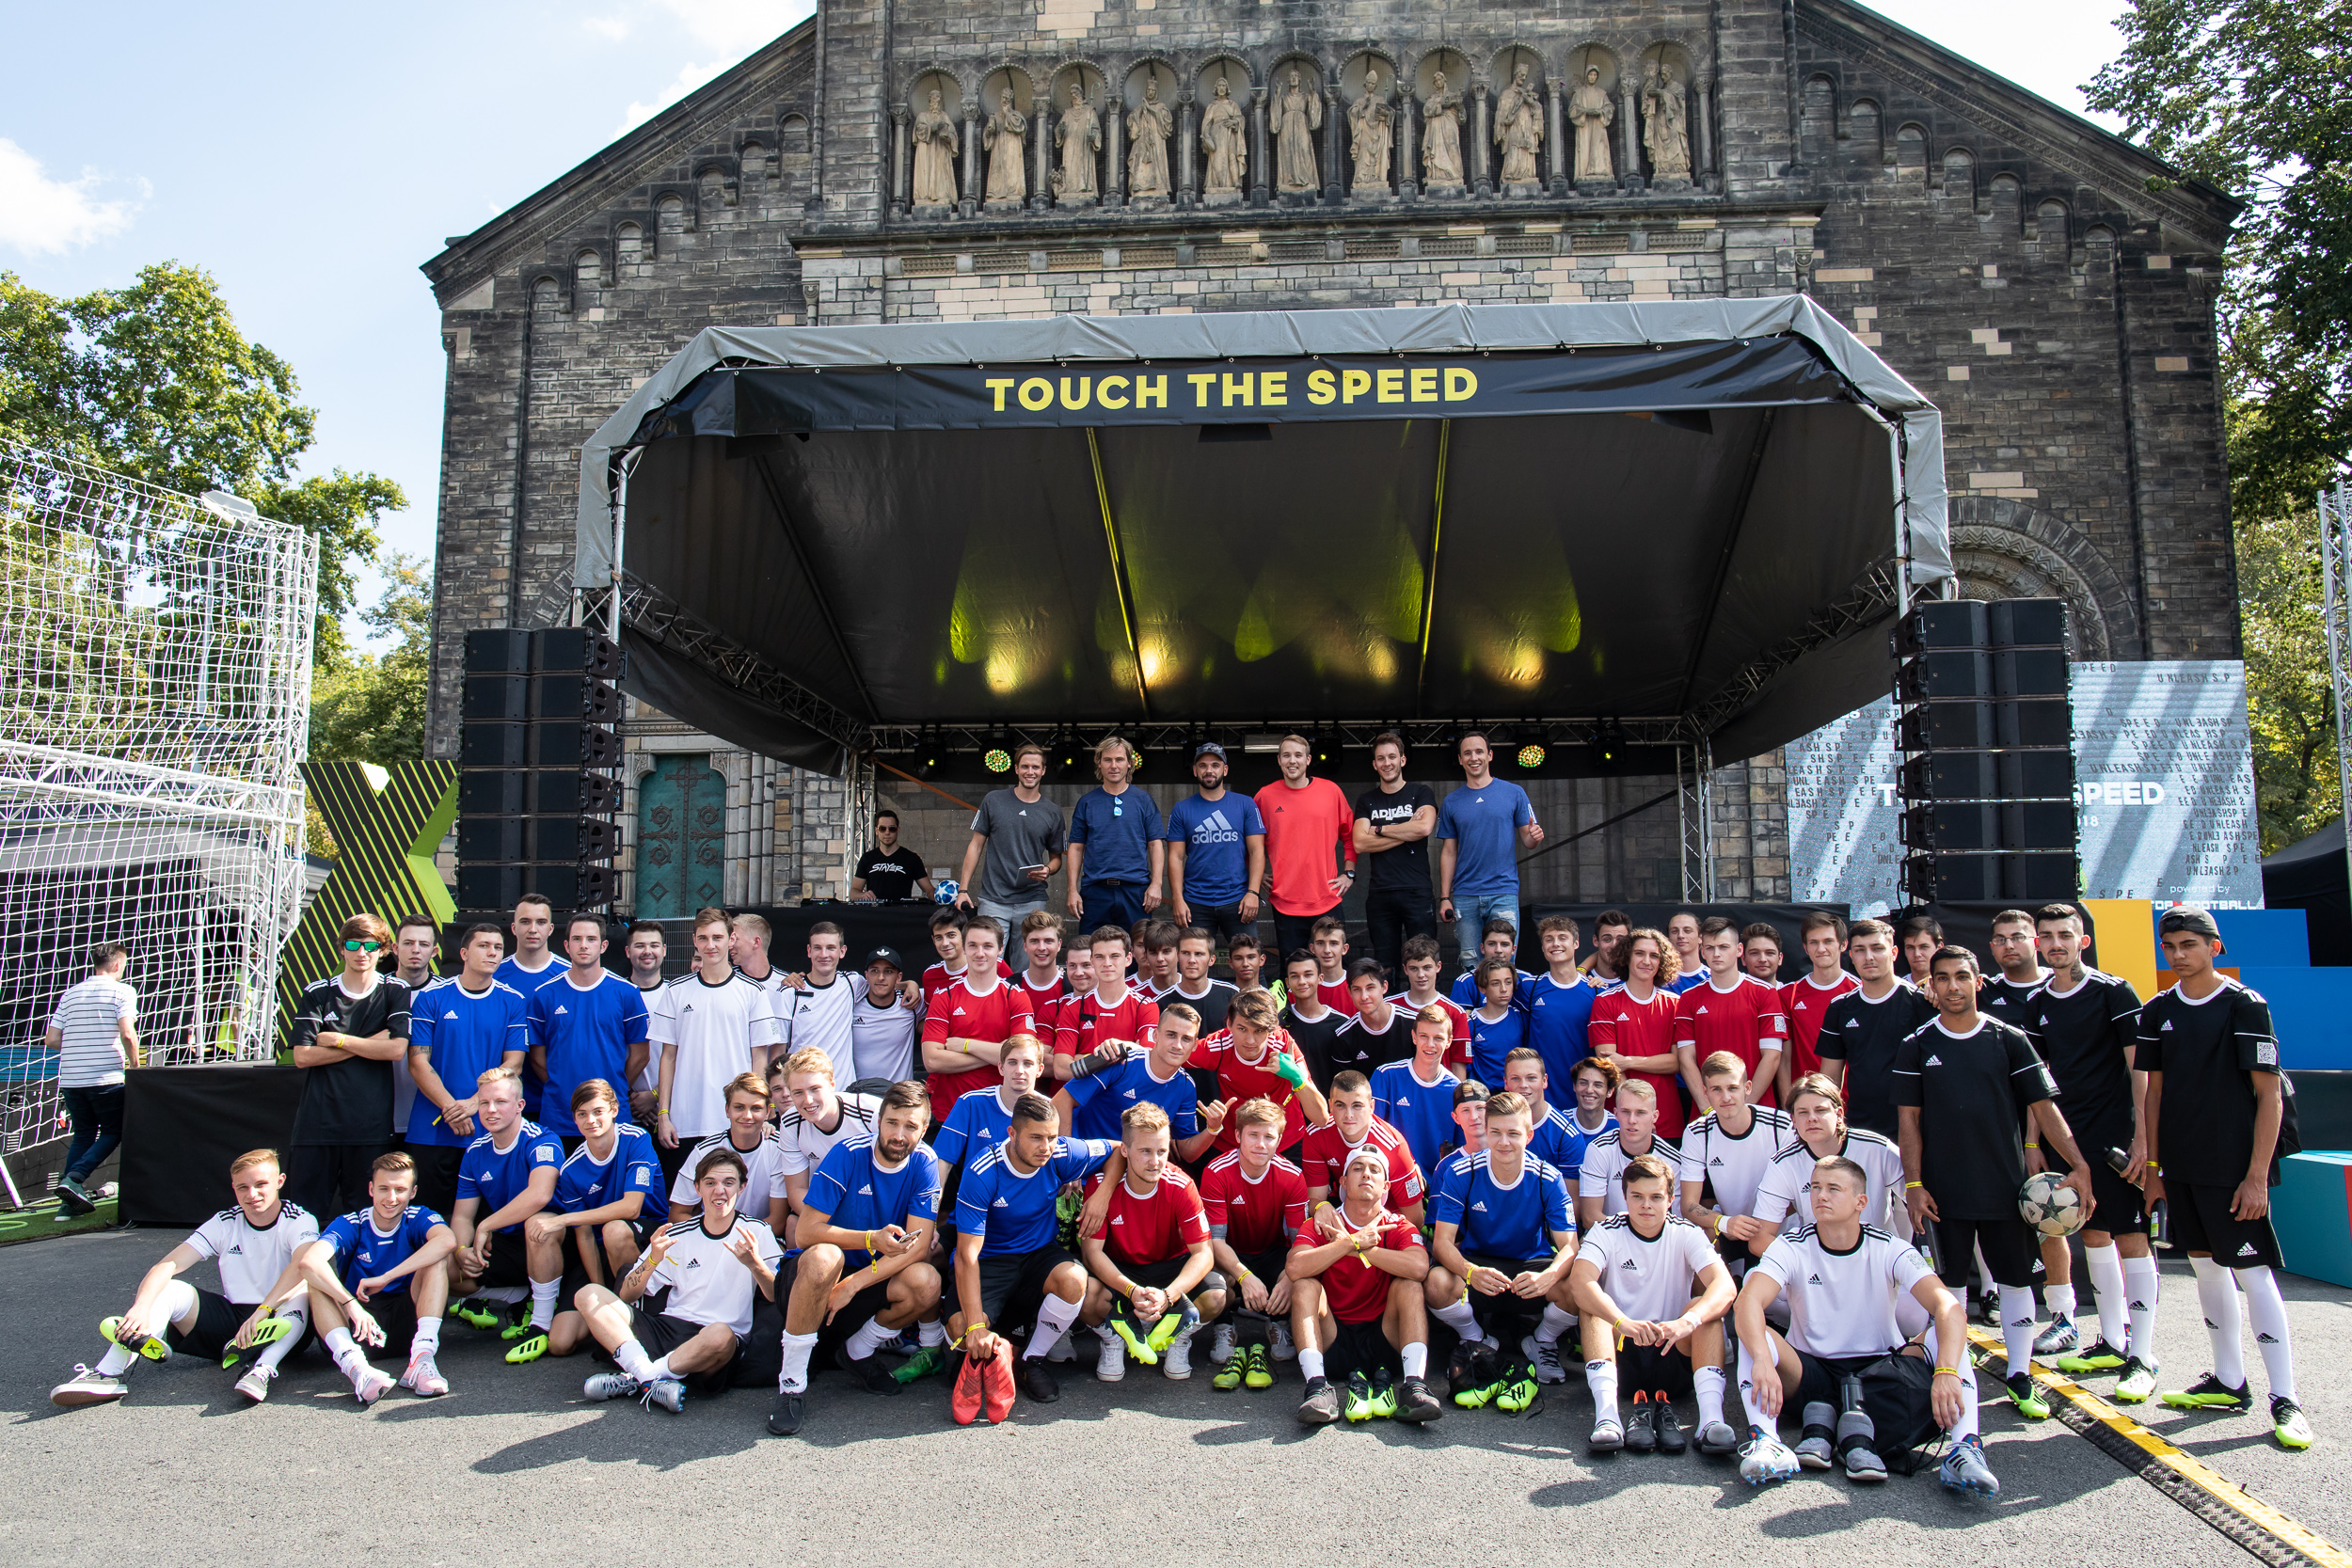 We hosted the adidas Touch the Speed tournament